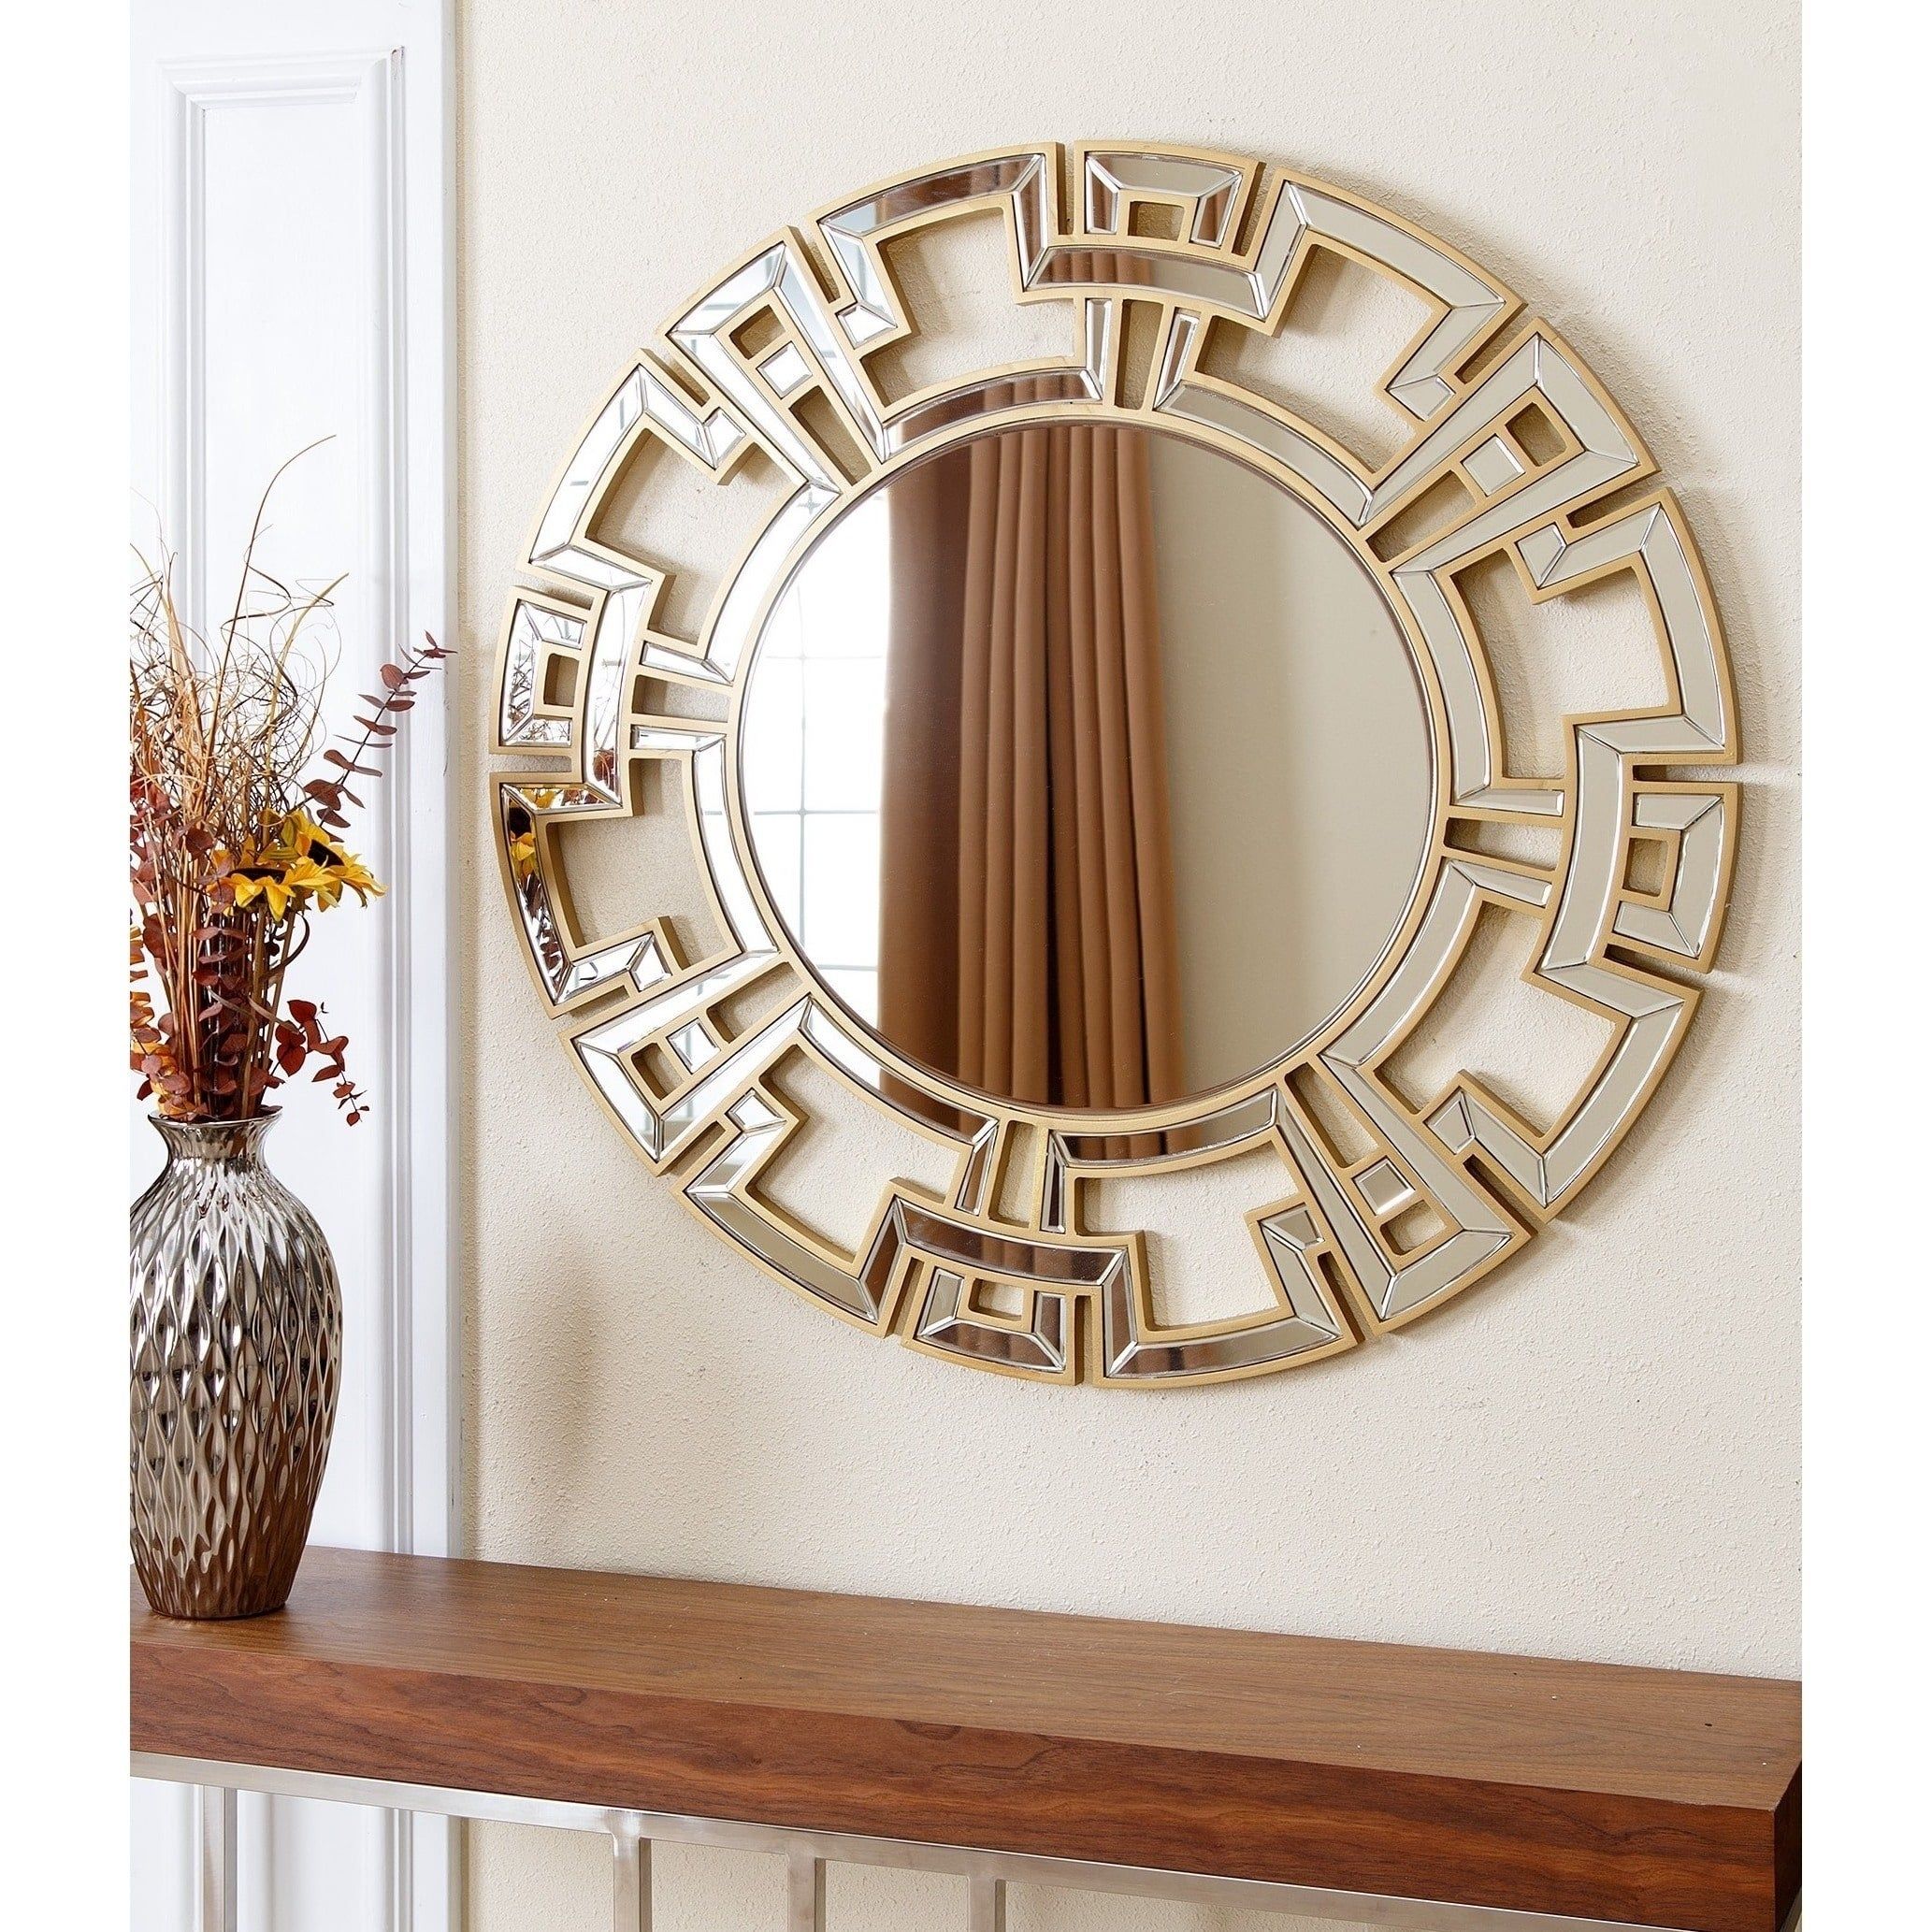 Abbyson Wall Mirror Accent Gold Wood Round Crafted Entryway Mounted Regarding Organic Natural Wood Round Wall Mirrors (View 15 of 15)